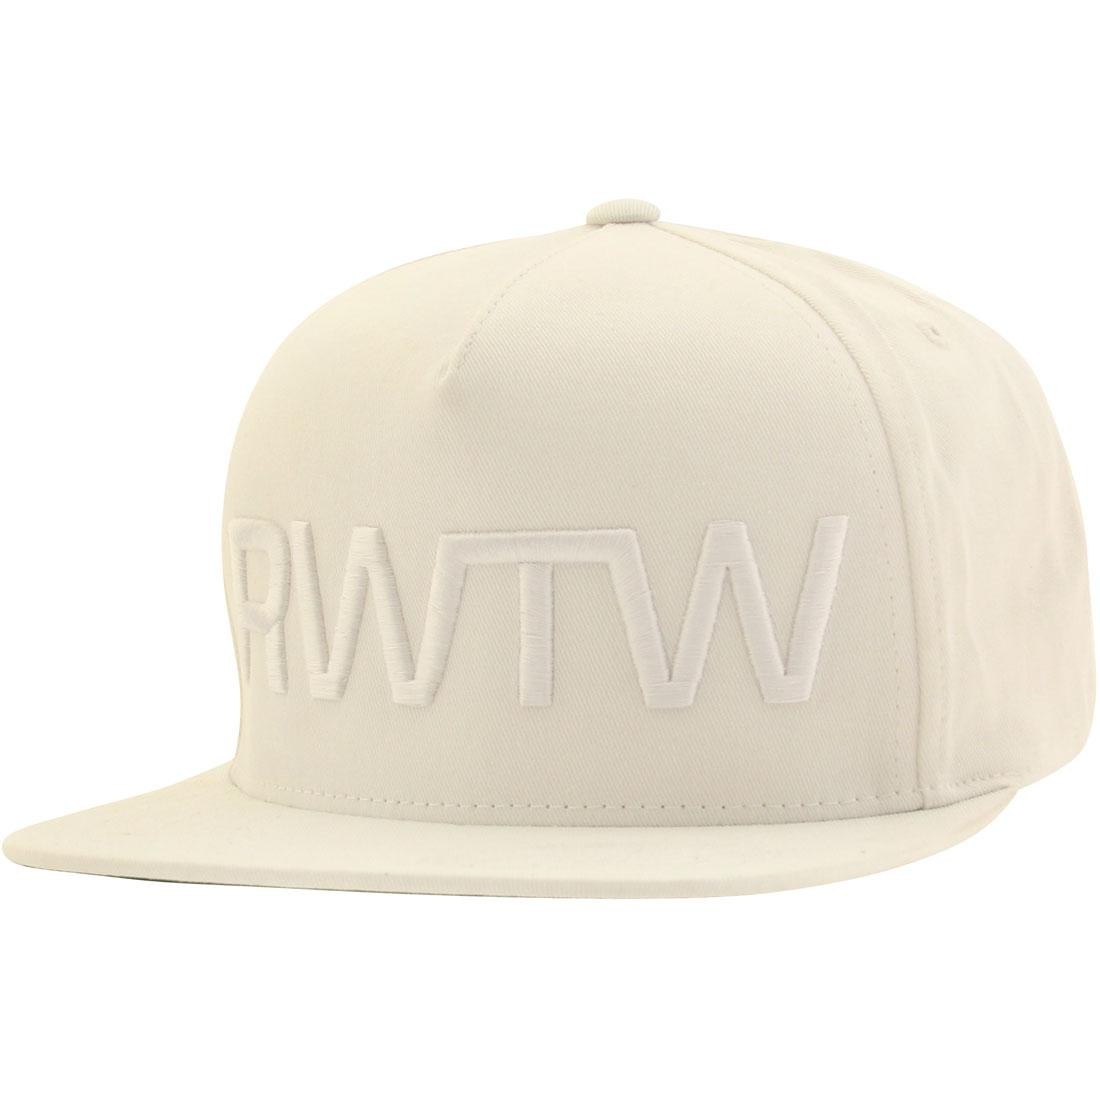 Roll With The Winner RWTW The Flag Snapback Cap (white / white)